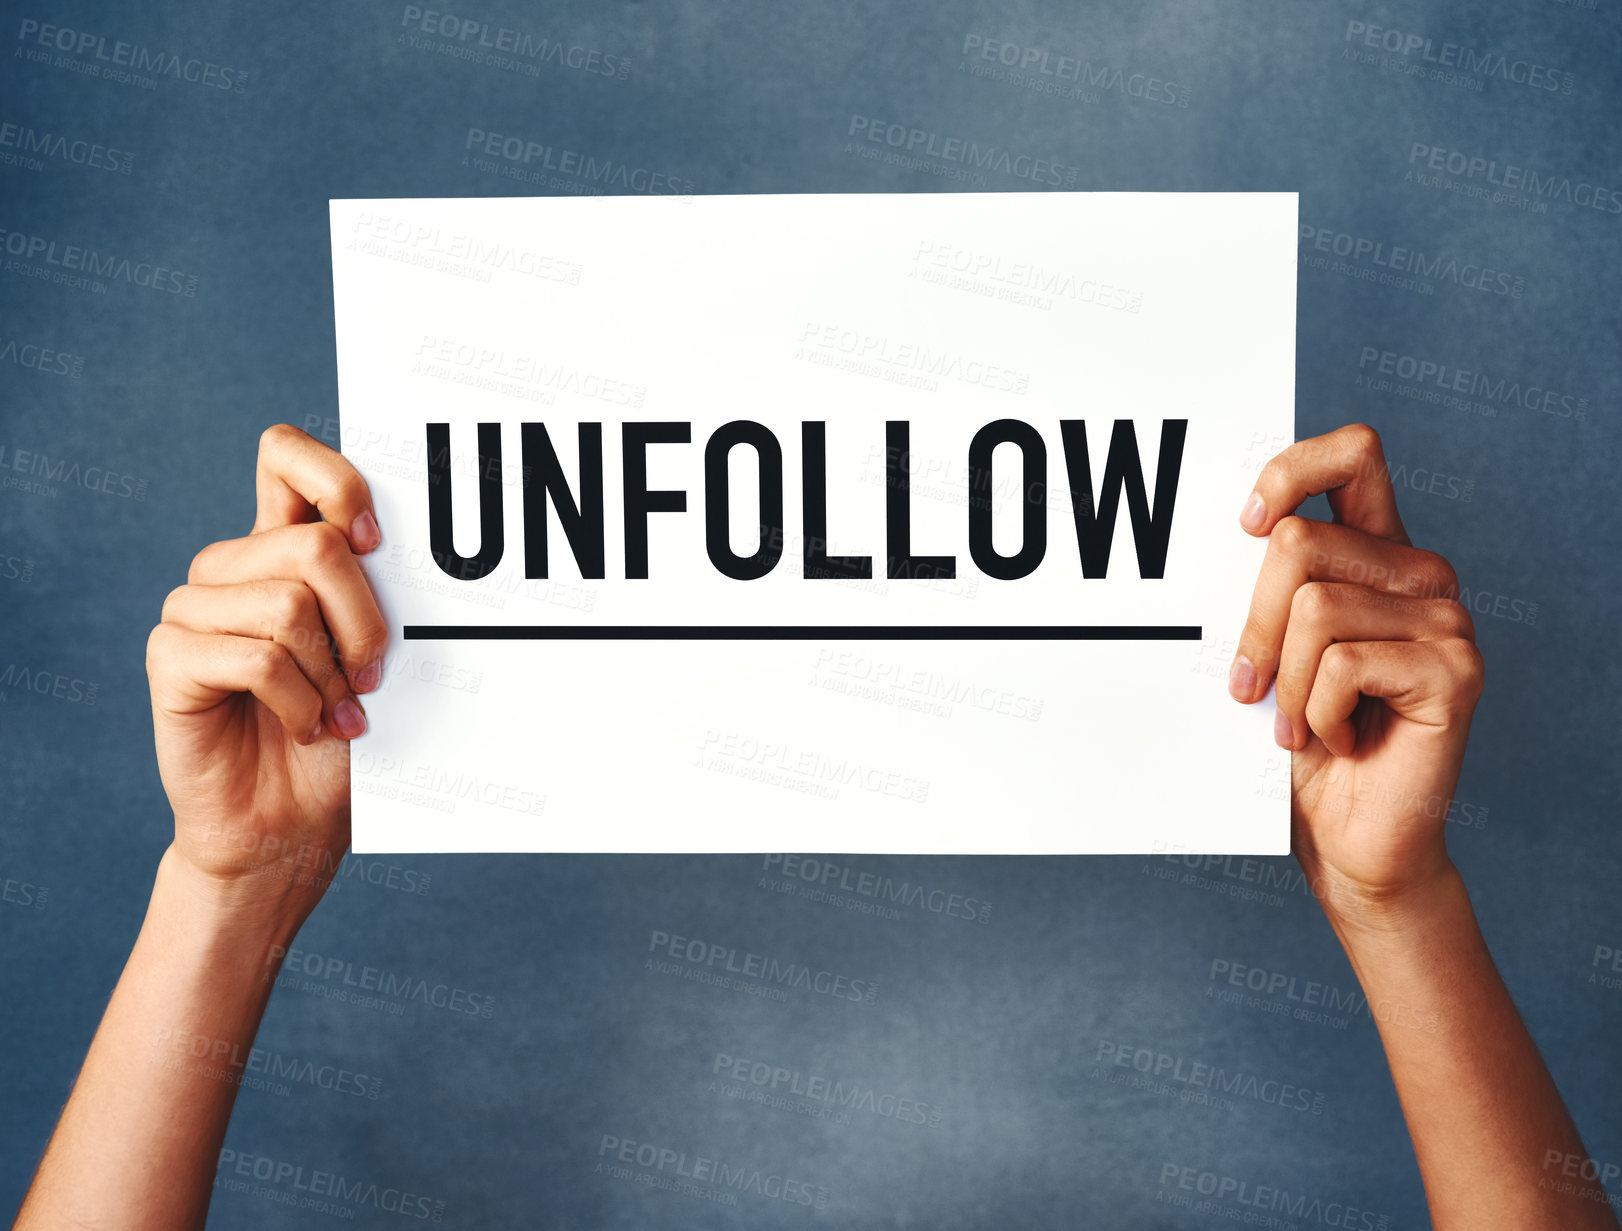 Buy stock photo Studio shot of an woman holding a sign that says “unfollow” against a blue background